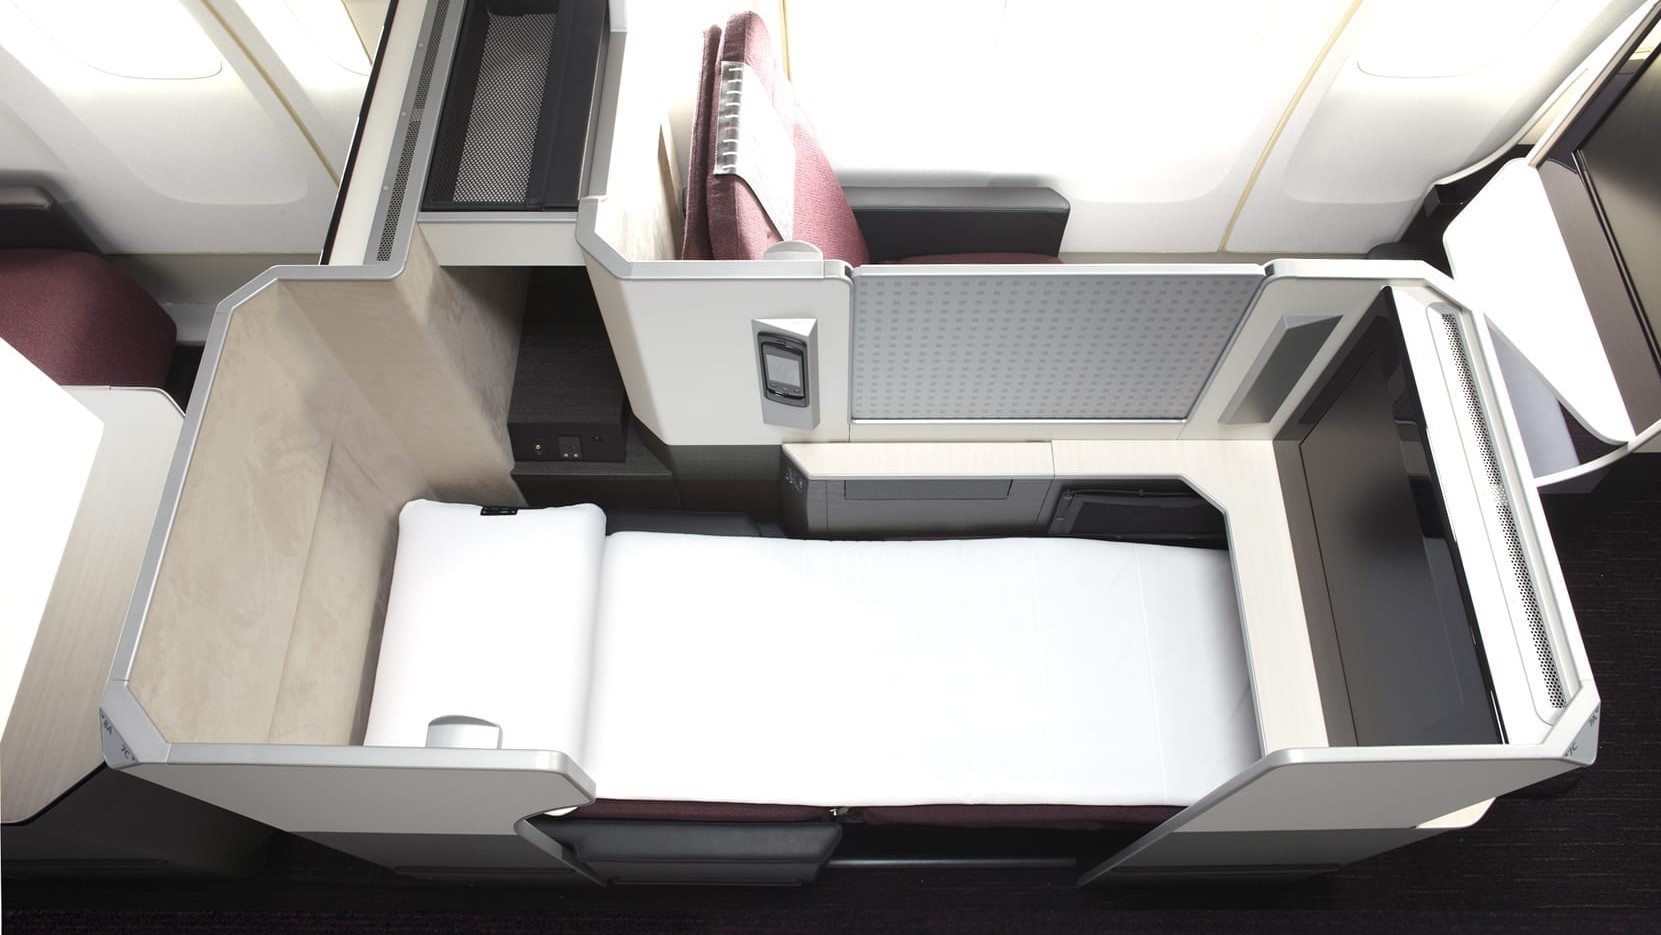 Review of Japan Airlines Business Class - BusinessClass.com